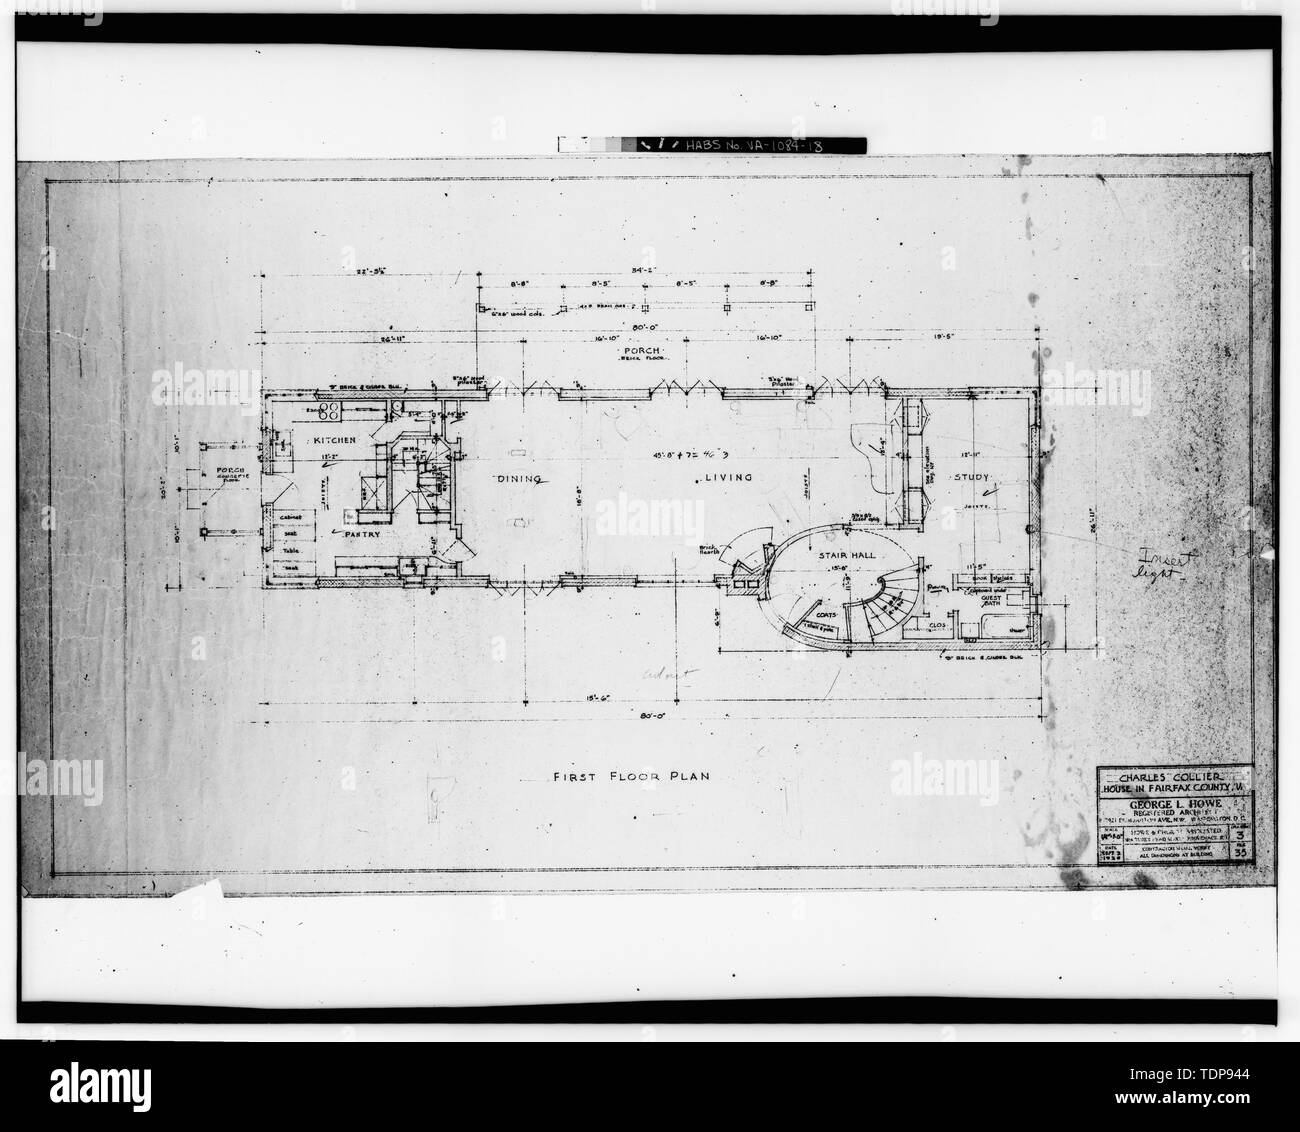 Photocopy of blackline print in possession of Mrs. William L. Reno. Original drawing by George Locke Howe, Architect 1938. 'FIRST FLOOR PLAN' - Mr. and Mrs. Charles Collier House, 6080 Leesburg Pike, Falls Church, Falls Church, VA; Howe, George Locke; Keily, Dan; Morris, Scott, transmitter Stock Photo